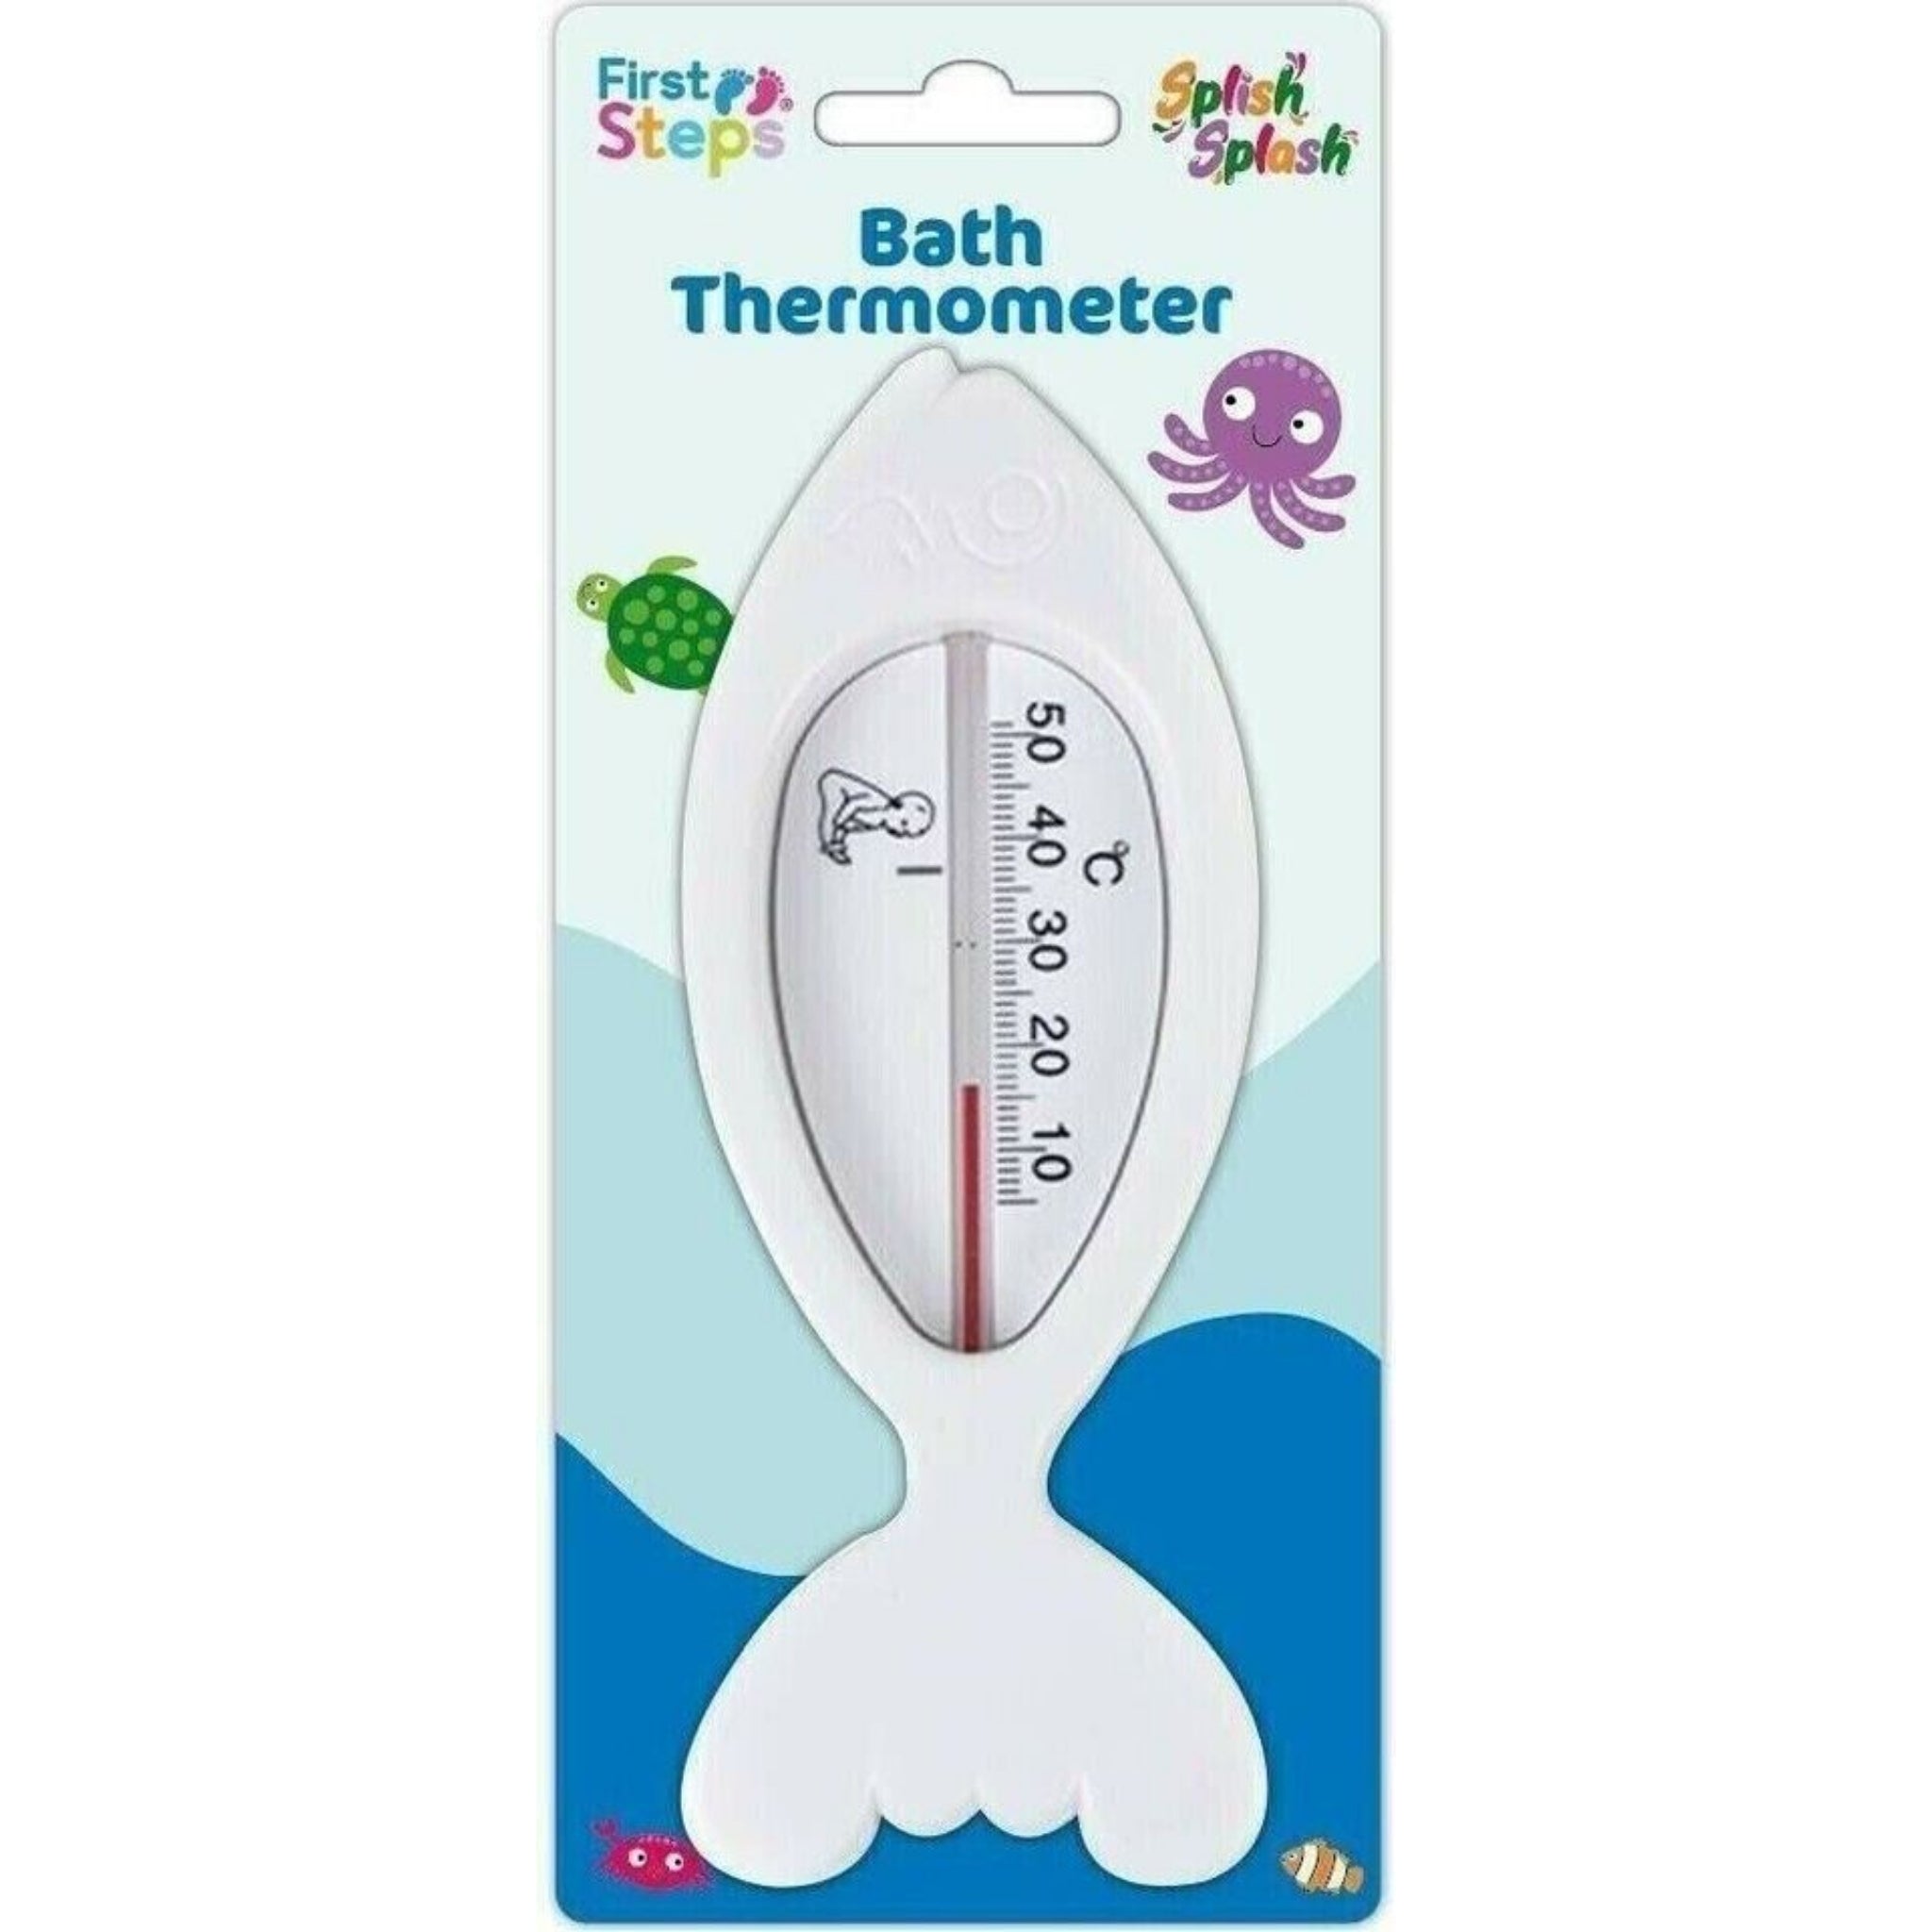 Beclen Harp 2 x Bath Thermometer Check Hot Cold Water Temp Ideal For New Born or Elderly